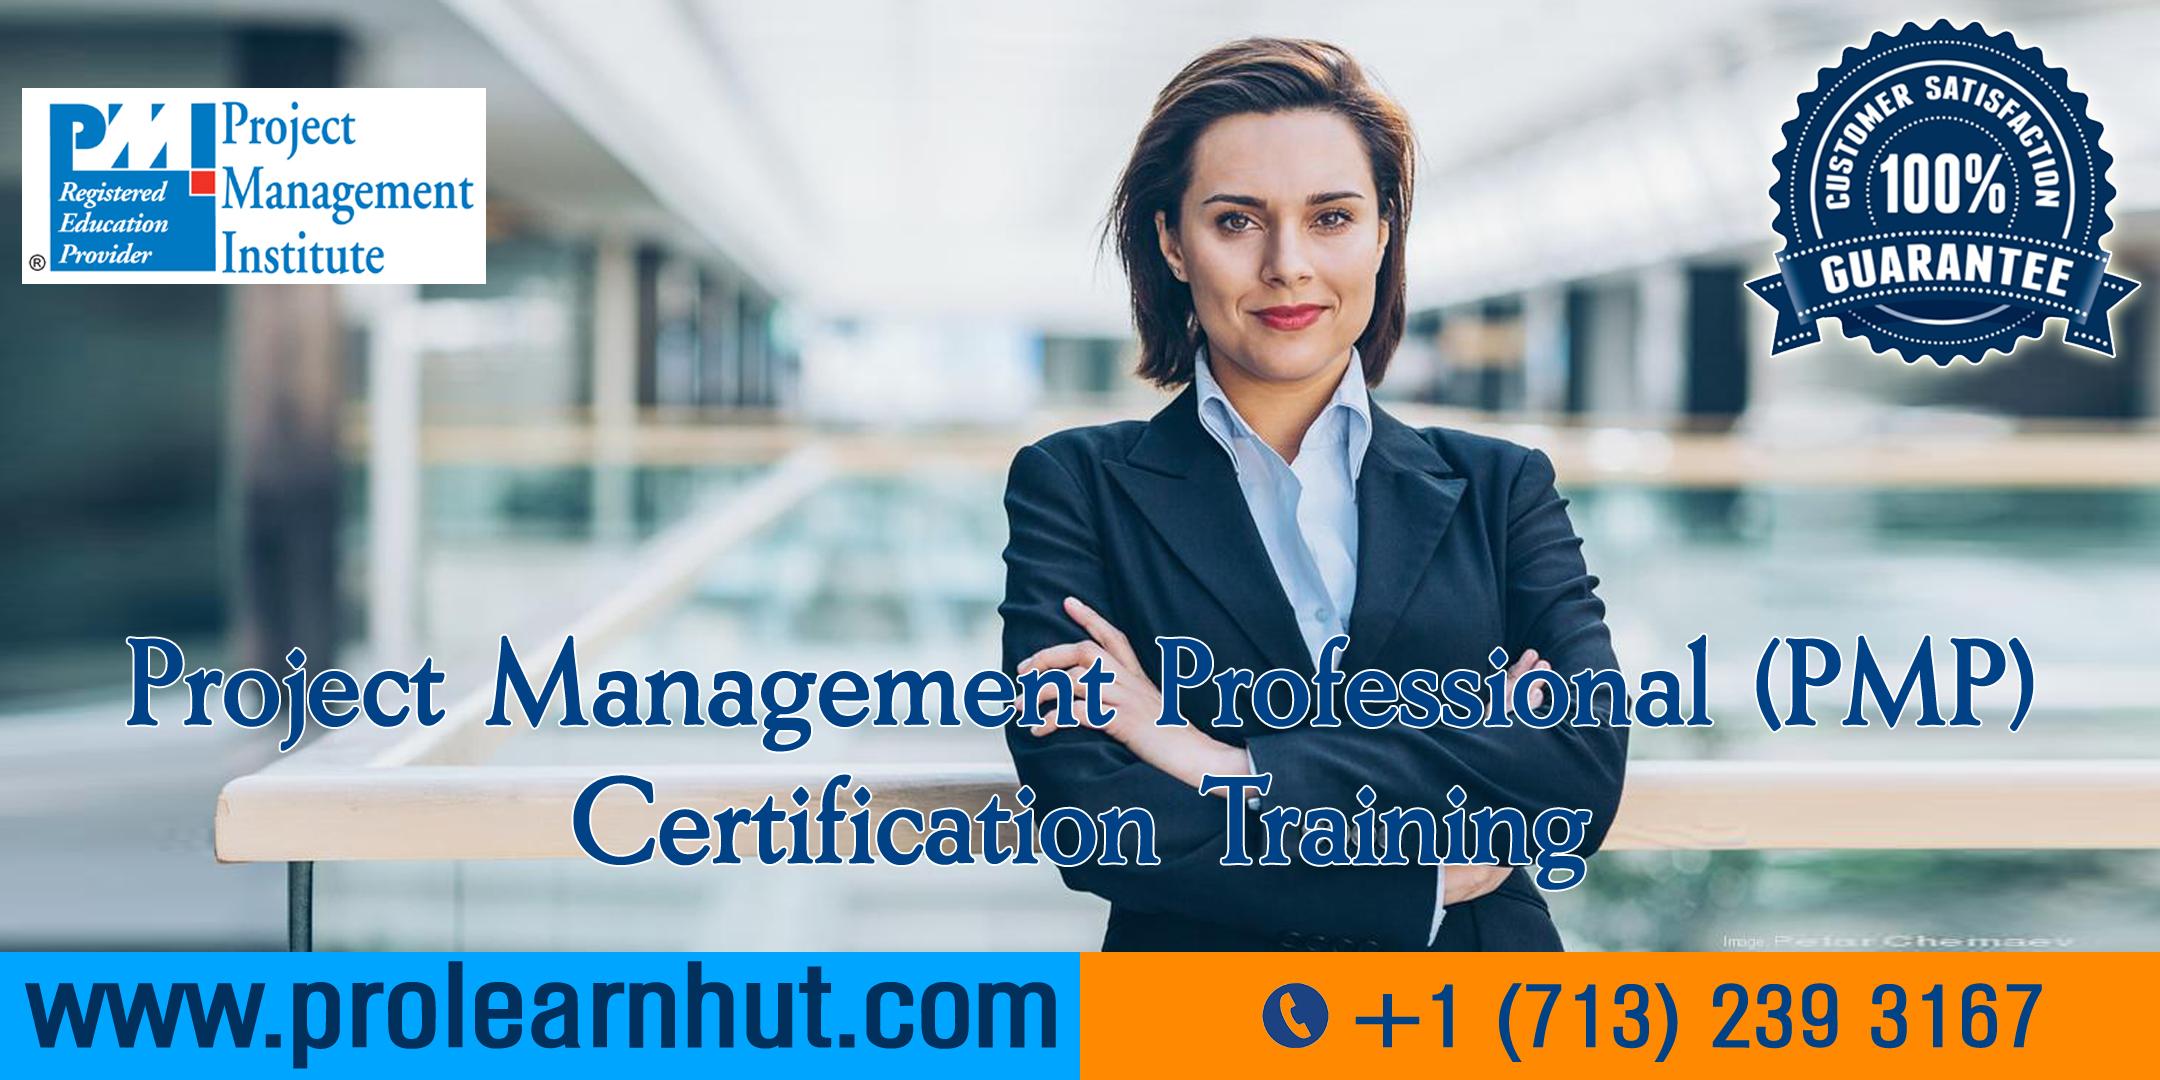 PMP Certification | Project Management Certification| PMP Training in Colorado Springs, CO | ProLearnHut